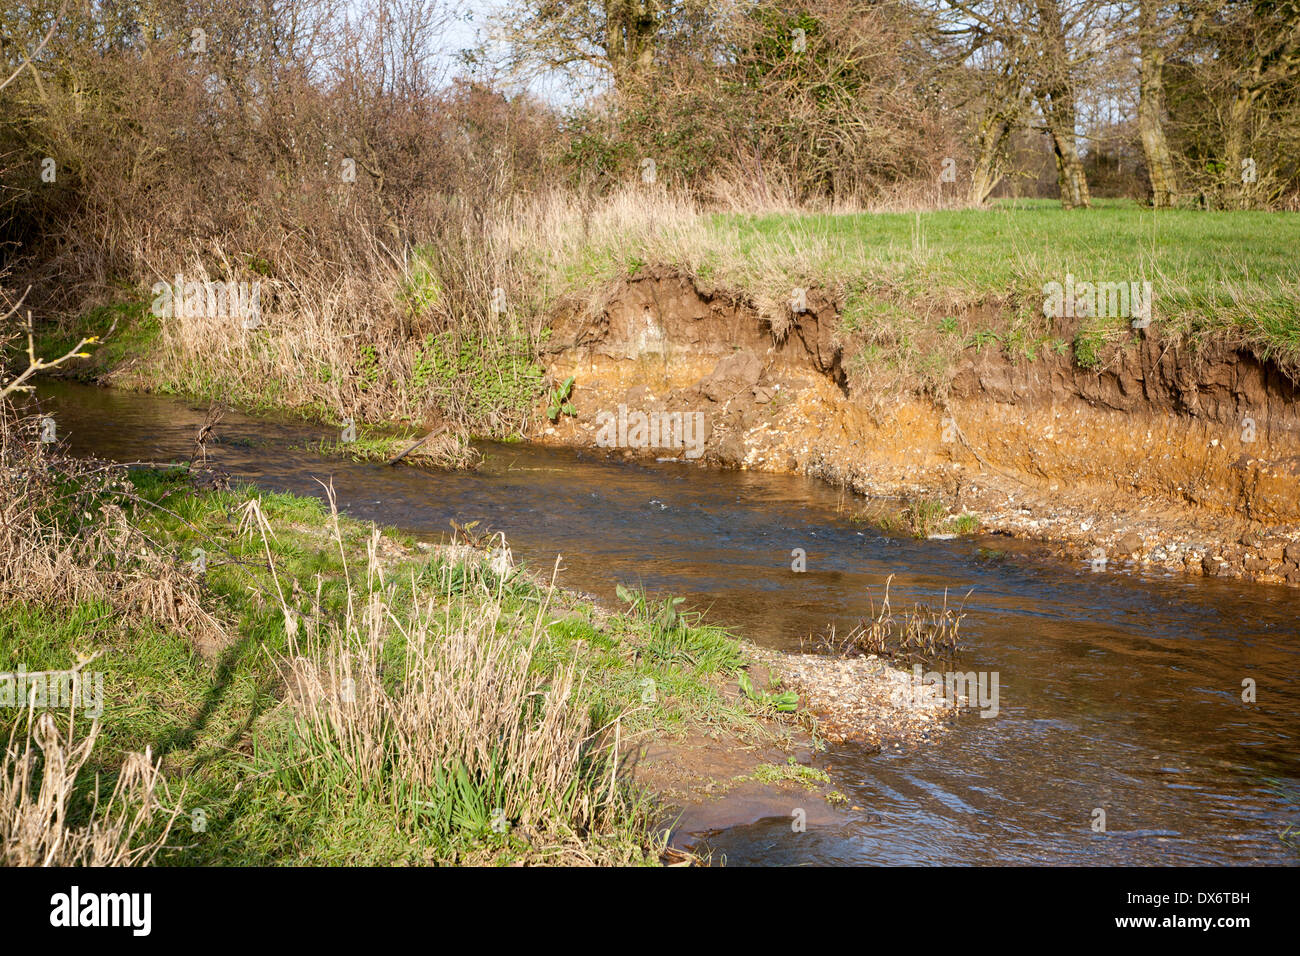 Erosion and deposition with river cliff and slip-off slope, River Deben, Ufford, Suffolk, England Stock Photo